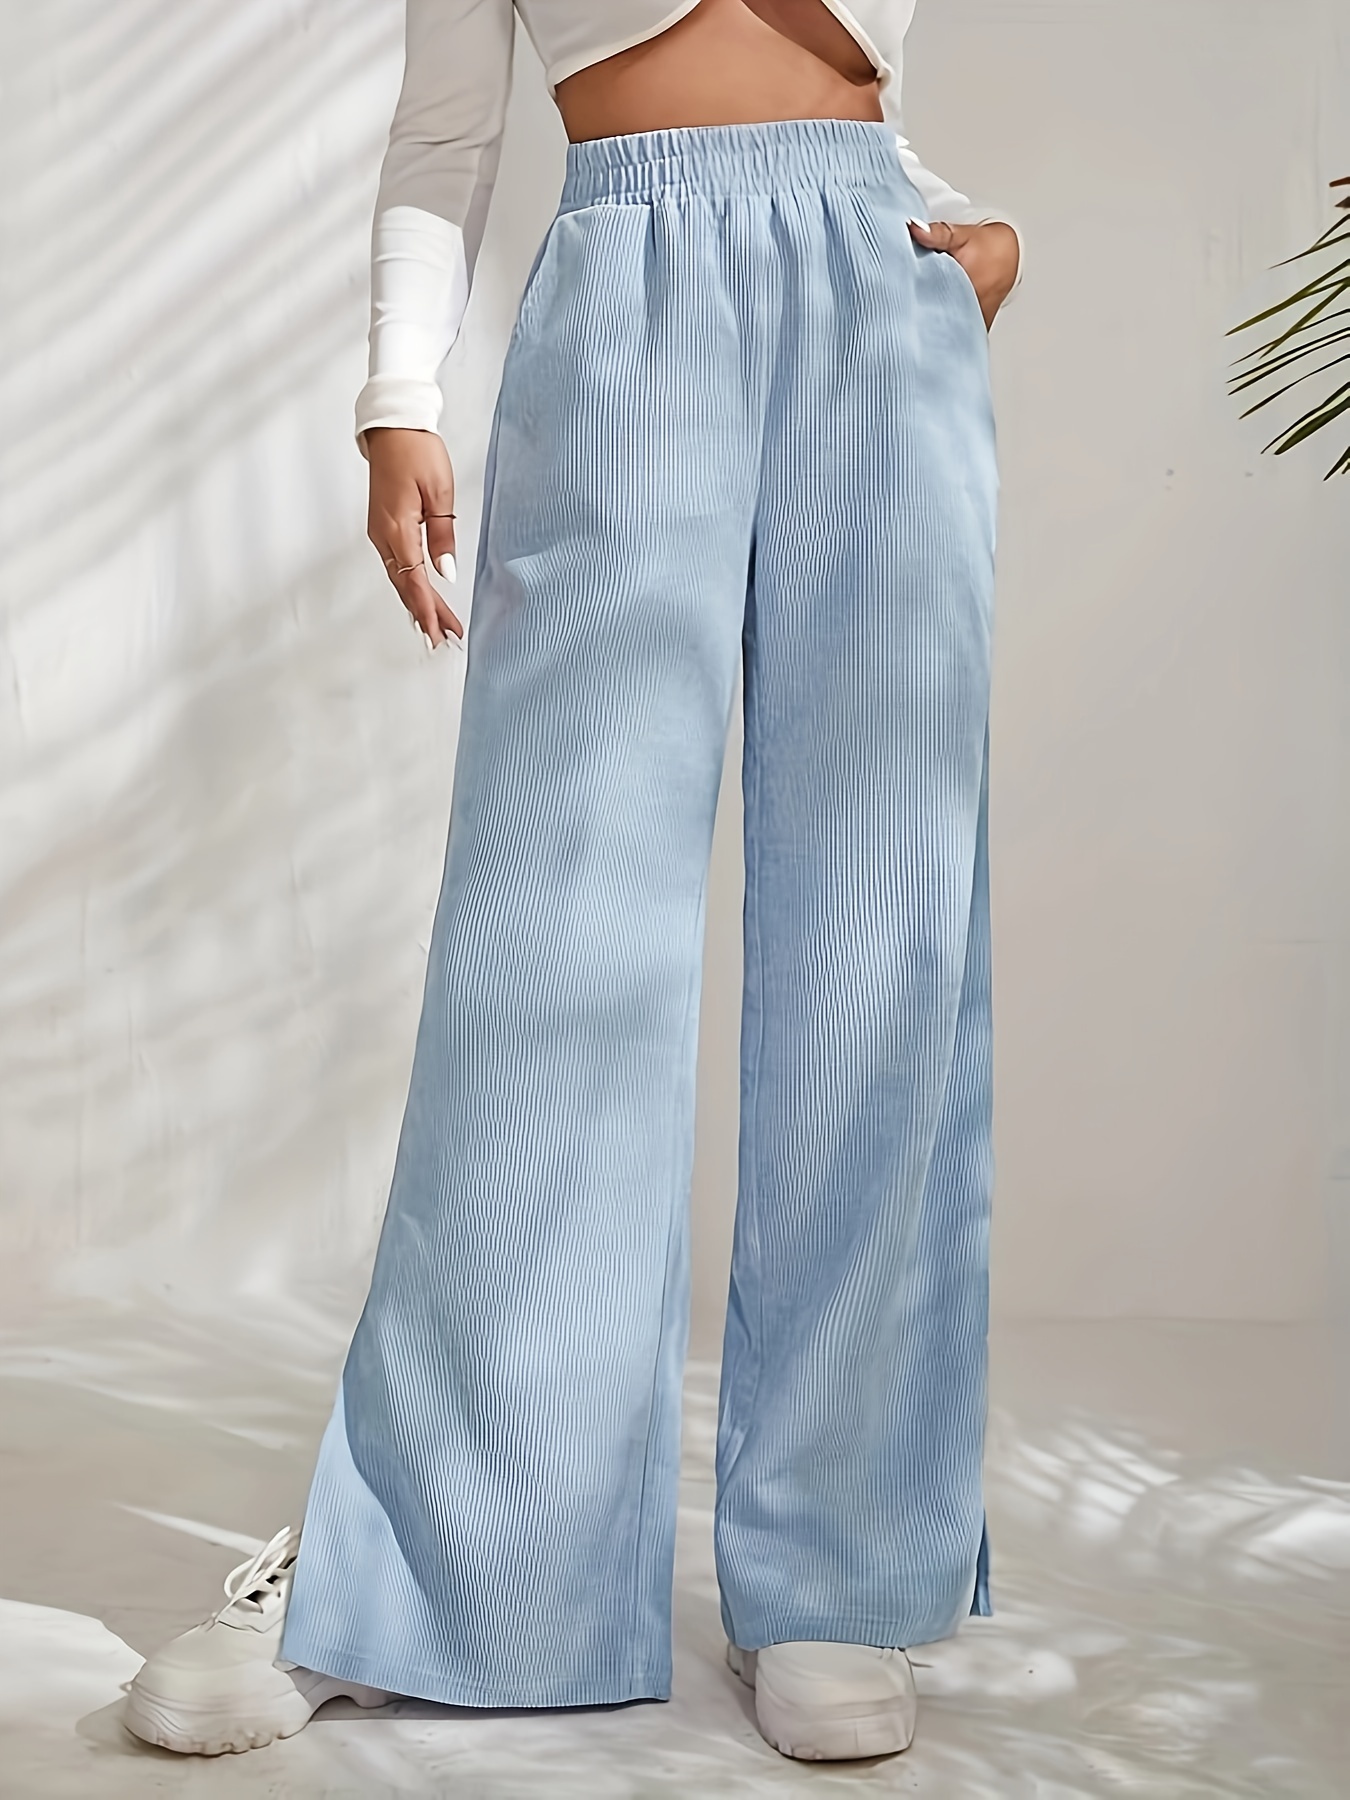 Solid Side Slit Pants, Casual Elastic Waist Pants For Spring & Fall,  Women's Clothing